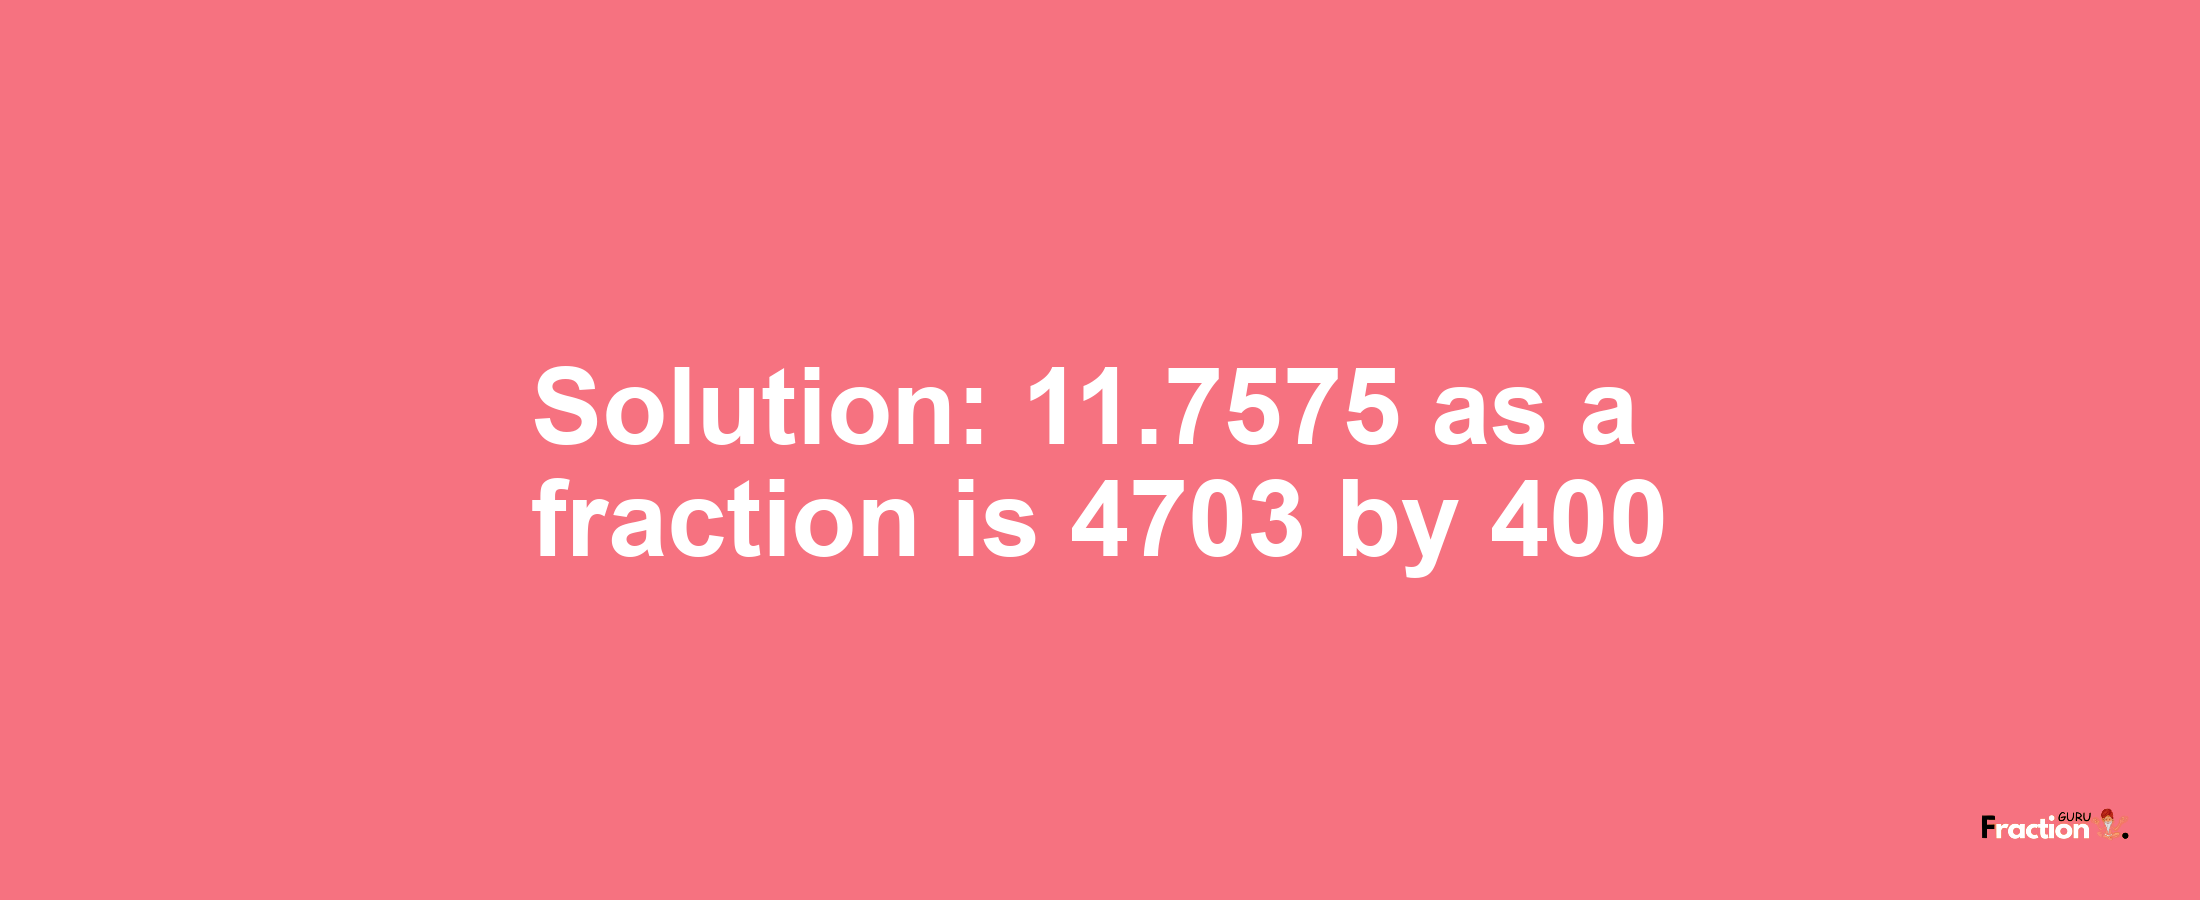 Solution:11.7575 as a fraction is 4703/400